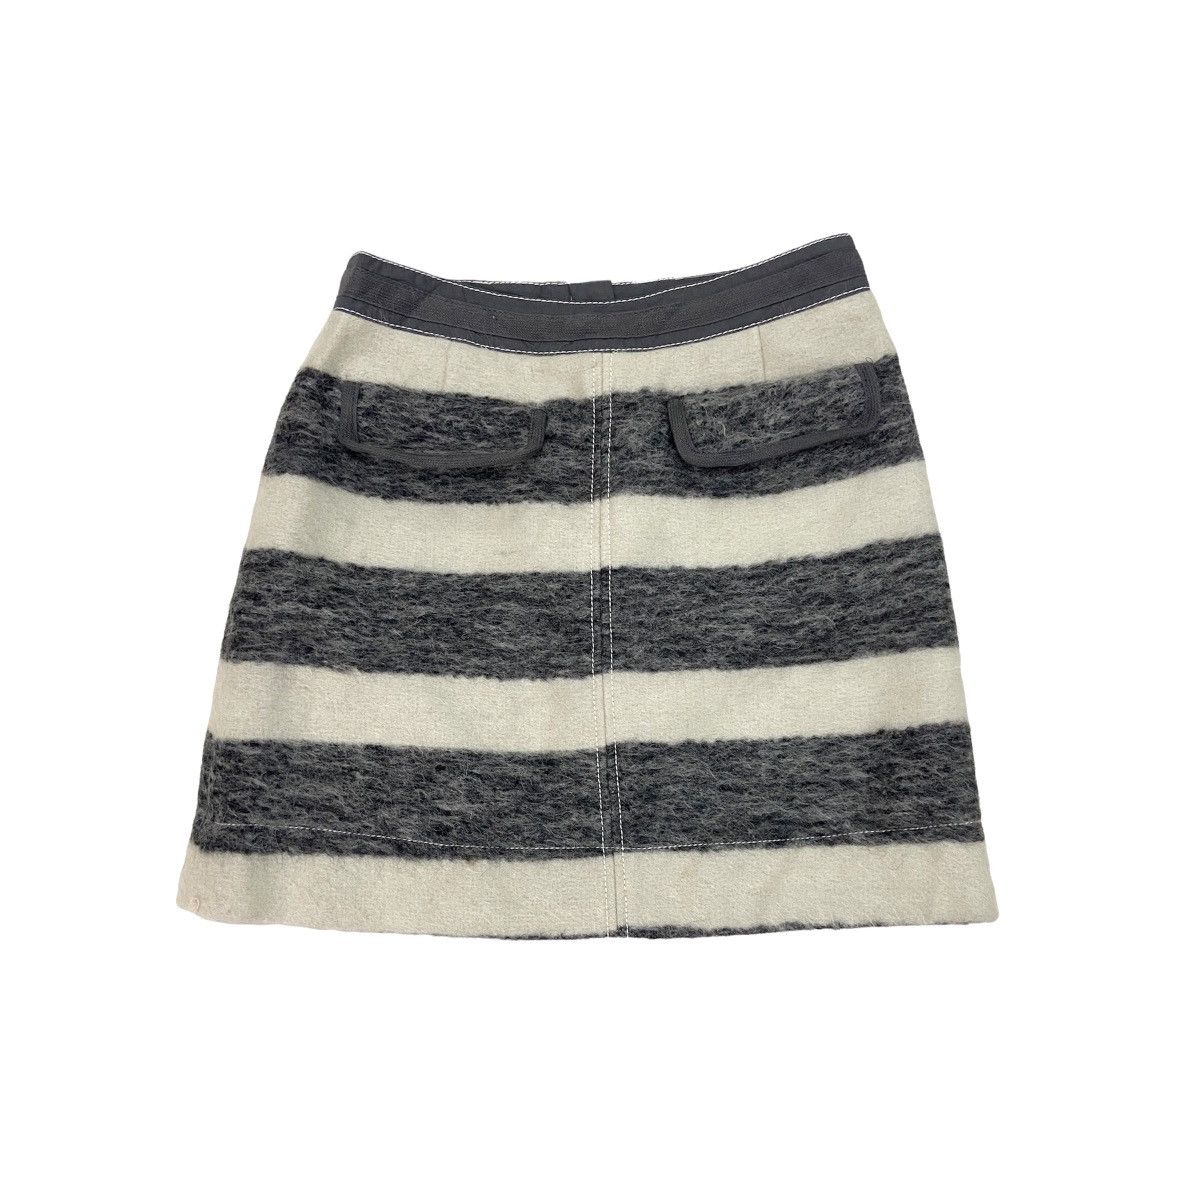 Marc by Marc Jacobs Wool Skirts - 2